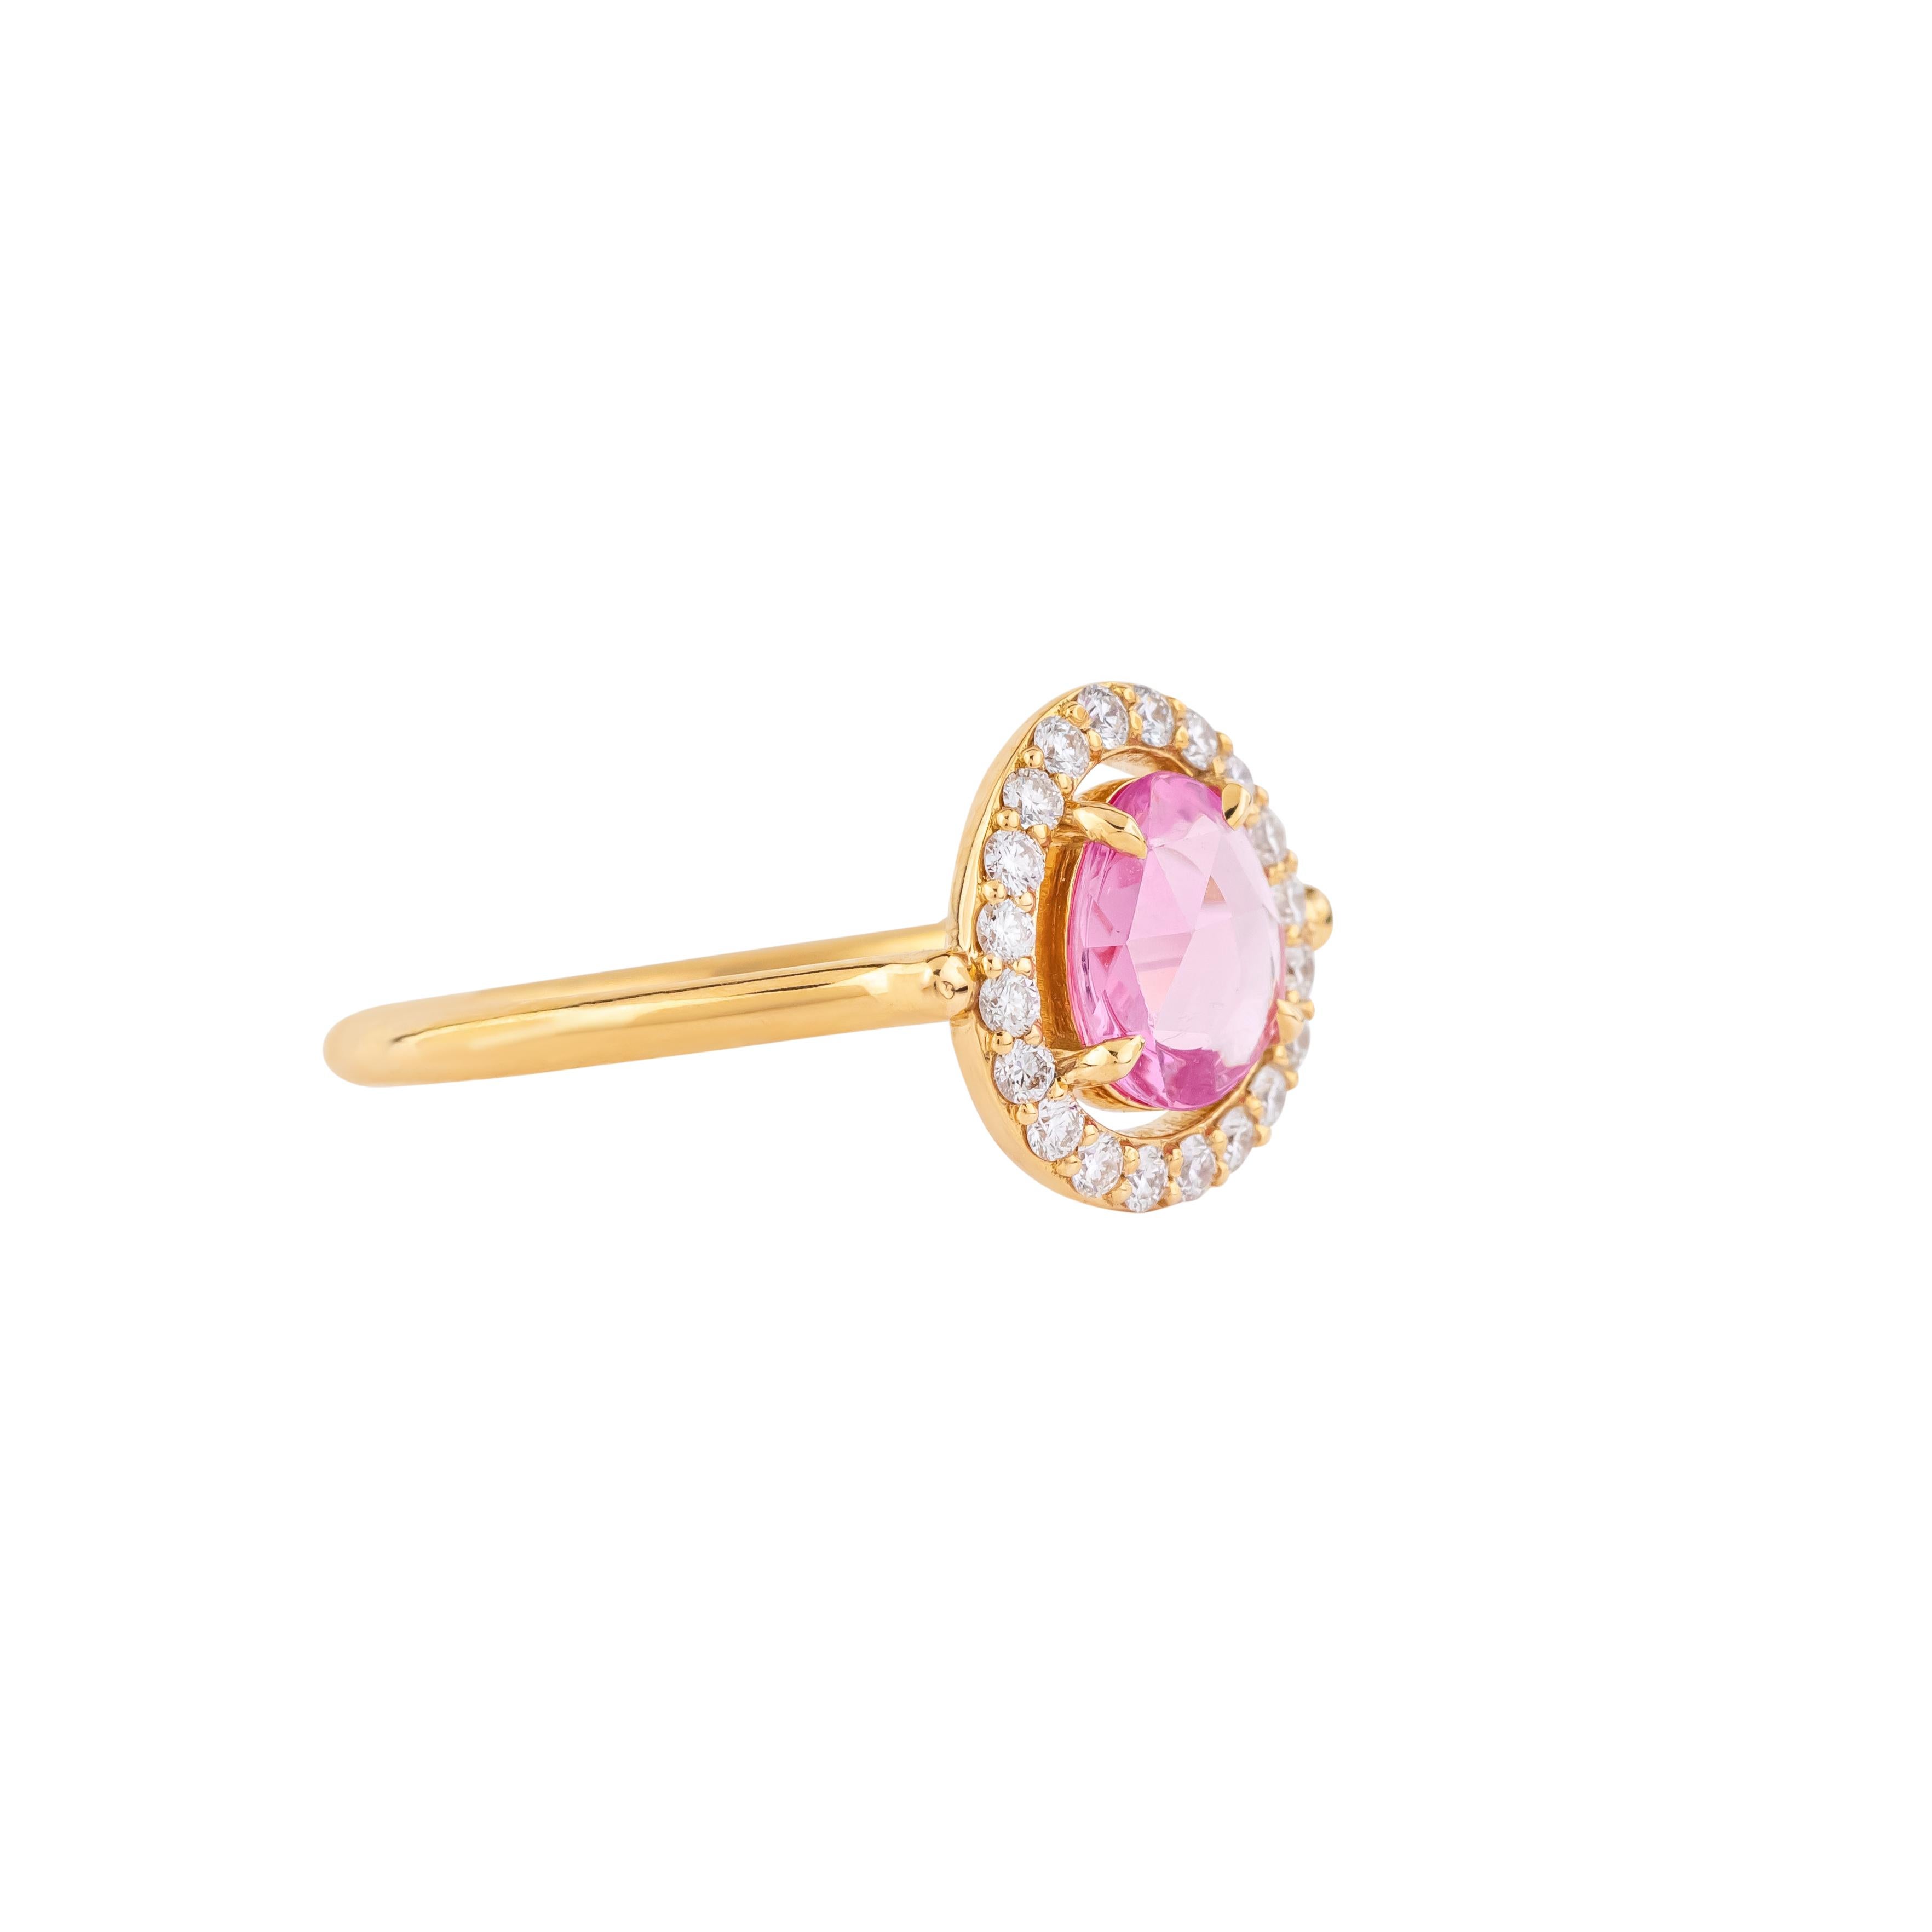 Immerse yourself in the allure of sophistication with our 18 Karat Gold 0.95 Carat Diamond and Pink Sapphire Solitaire Ring – a timeless masterpiece crafted to perfection. Each ring is meticulously curated, reflecting our commitment to excellence in